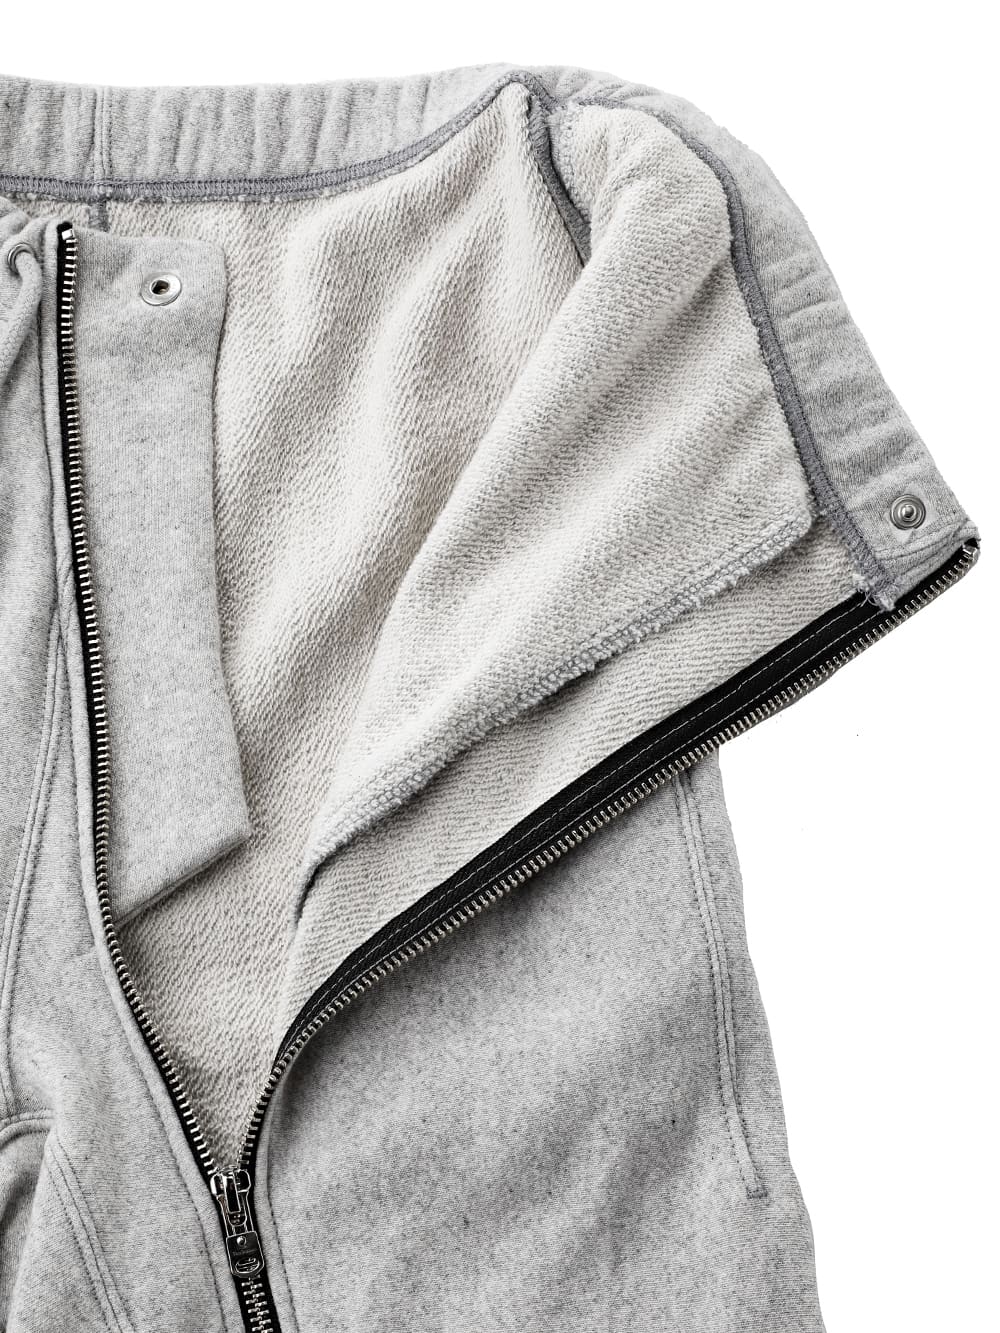 new two-way zip reverse jogger pant.(solid)